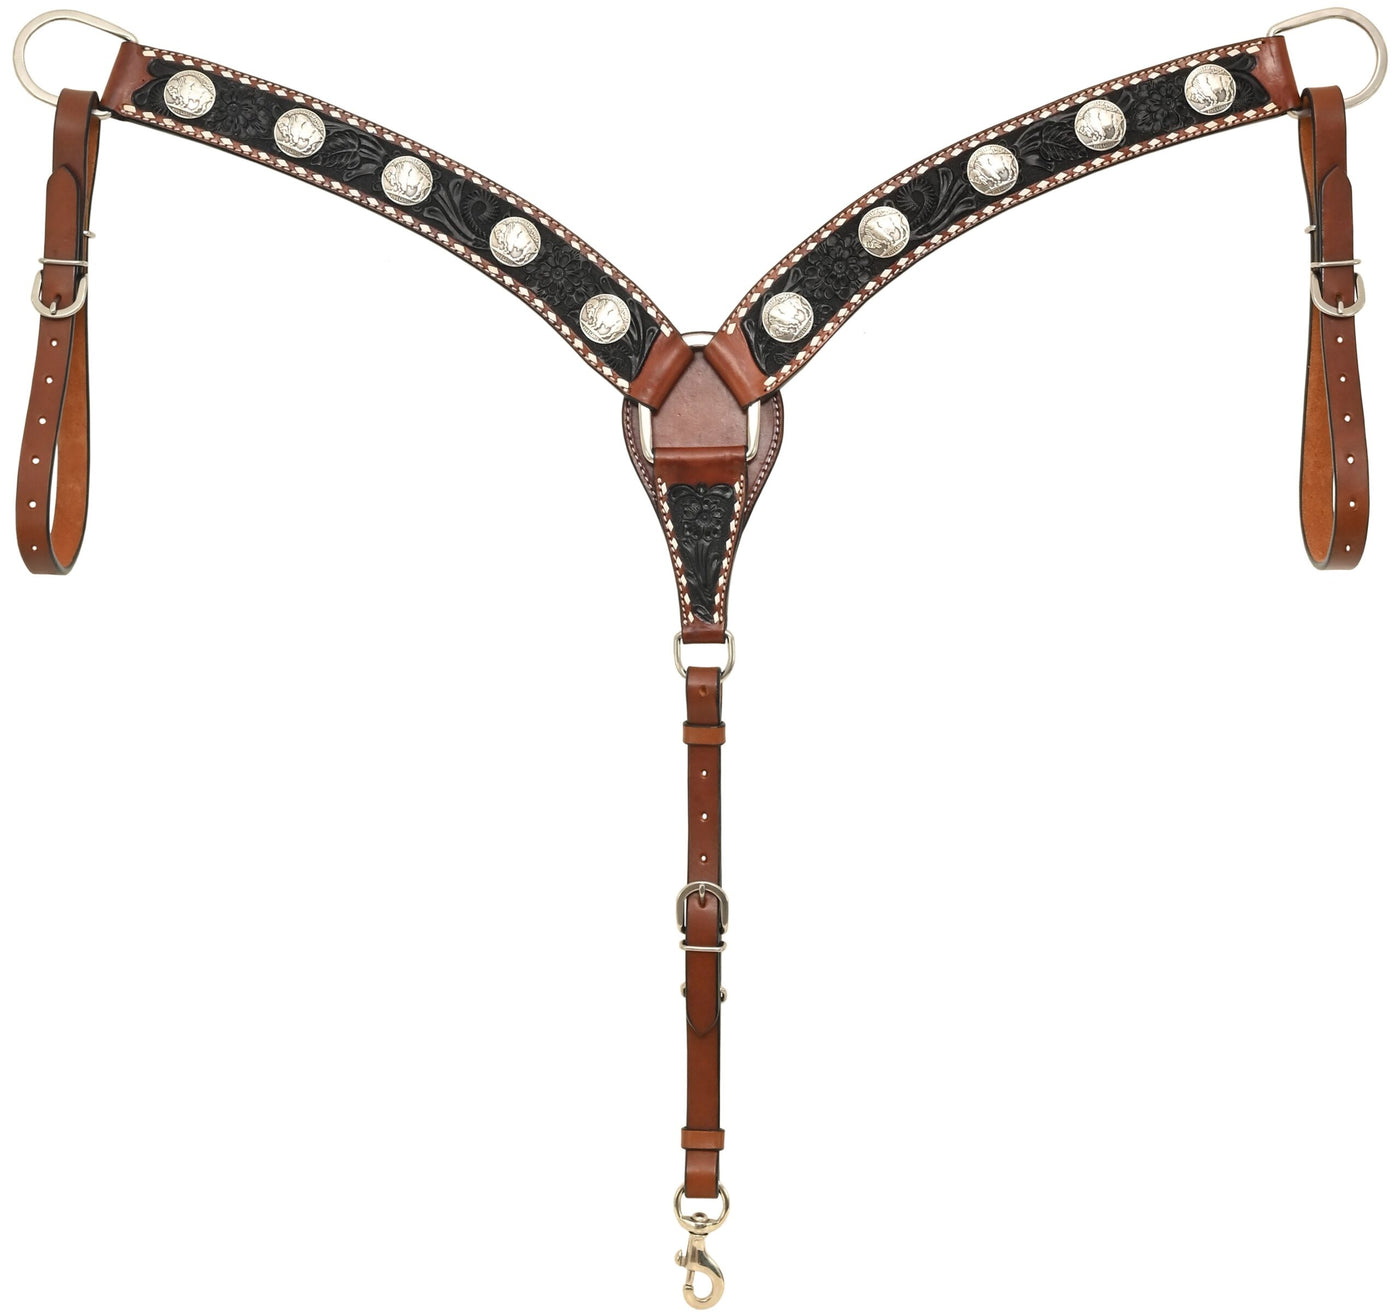 Rafter T Floral Tooled Breast Collar w/White Buckstitch & Buffalo Conchos